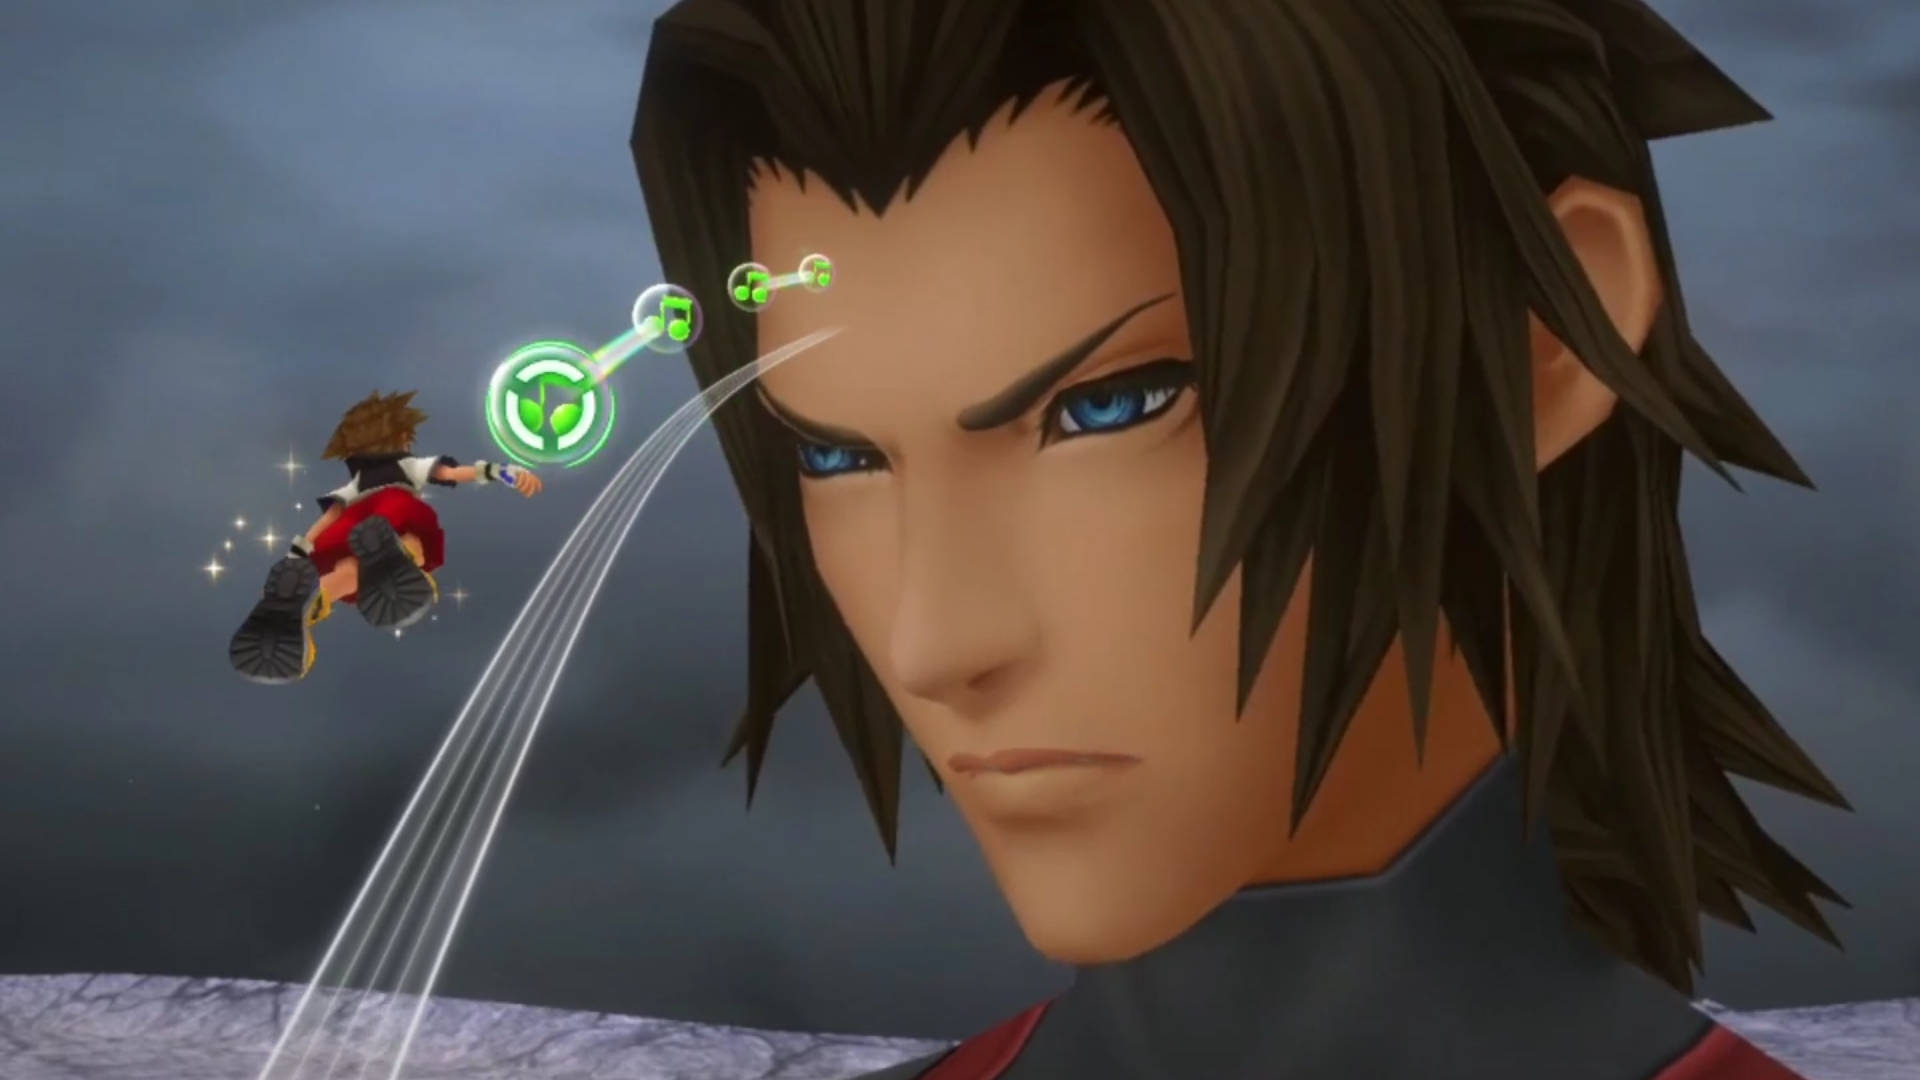 Kingdom Hearts: Melody of Memory – Is It Important To The Story